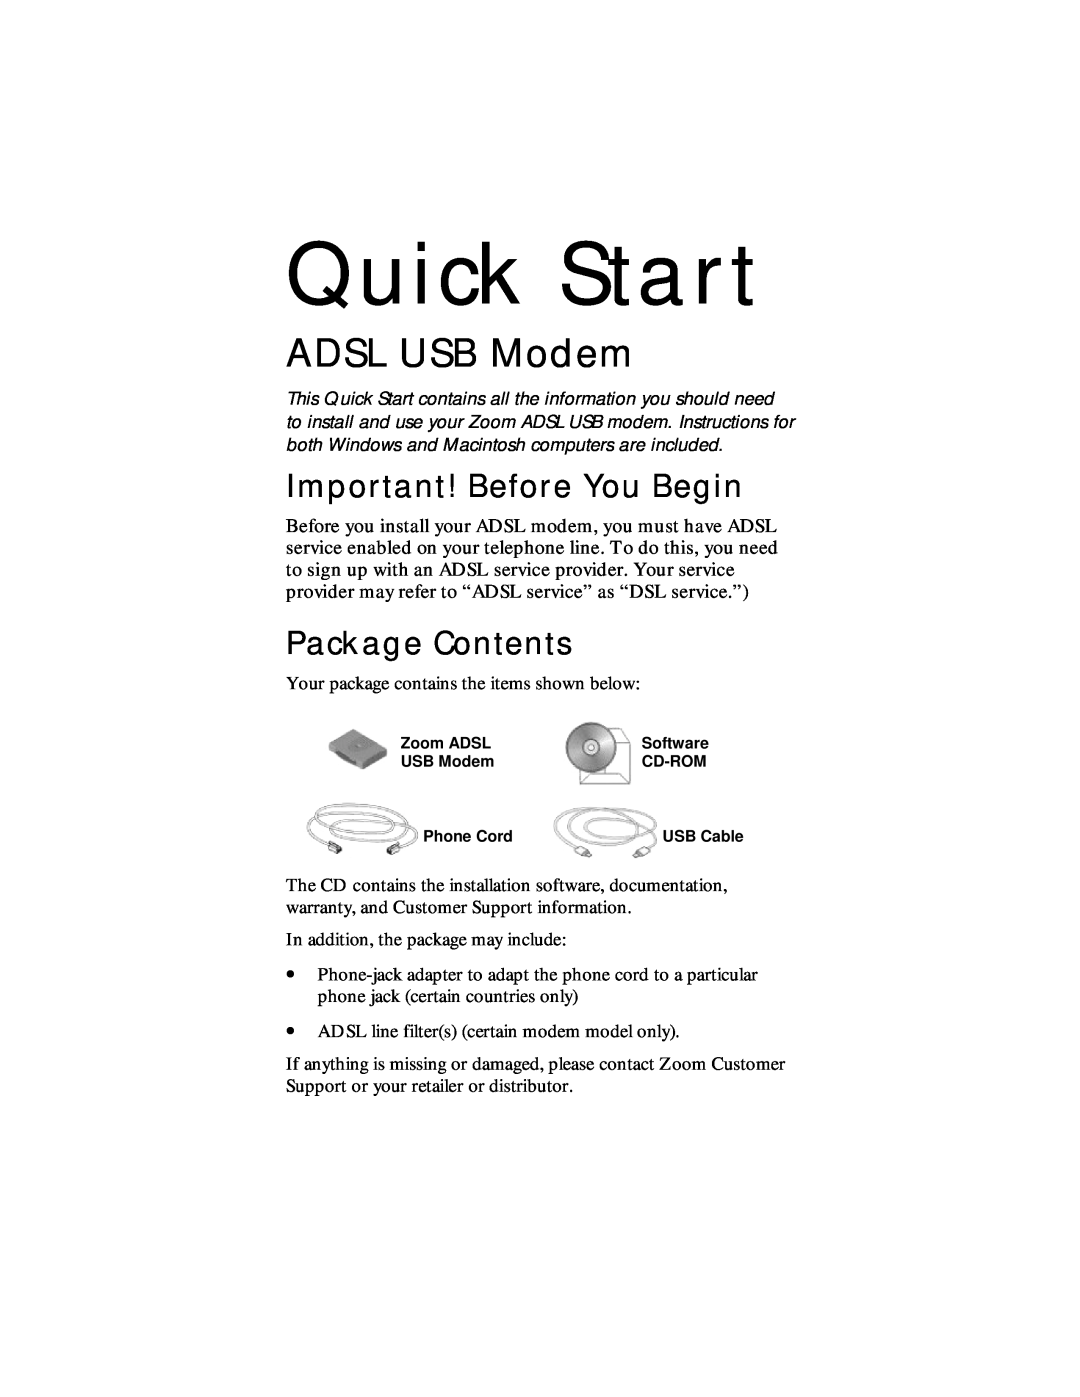 Zoom None quick start Important! Before You Begin, Package Contents, Quick Start, ADSL USB Modem 